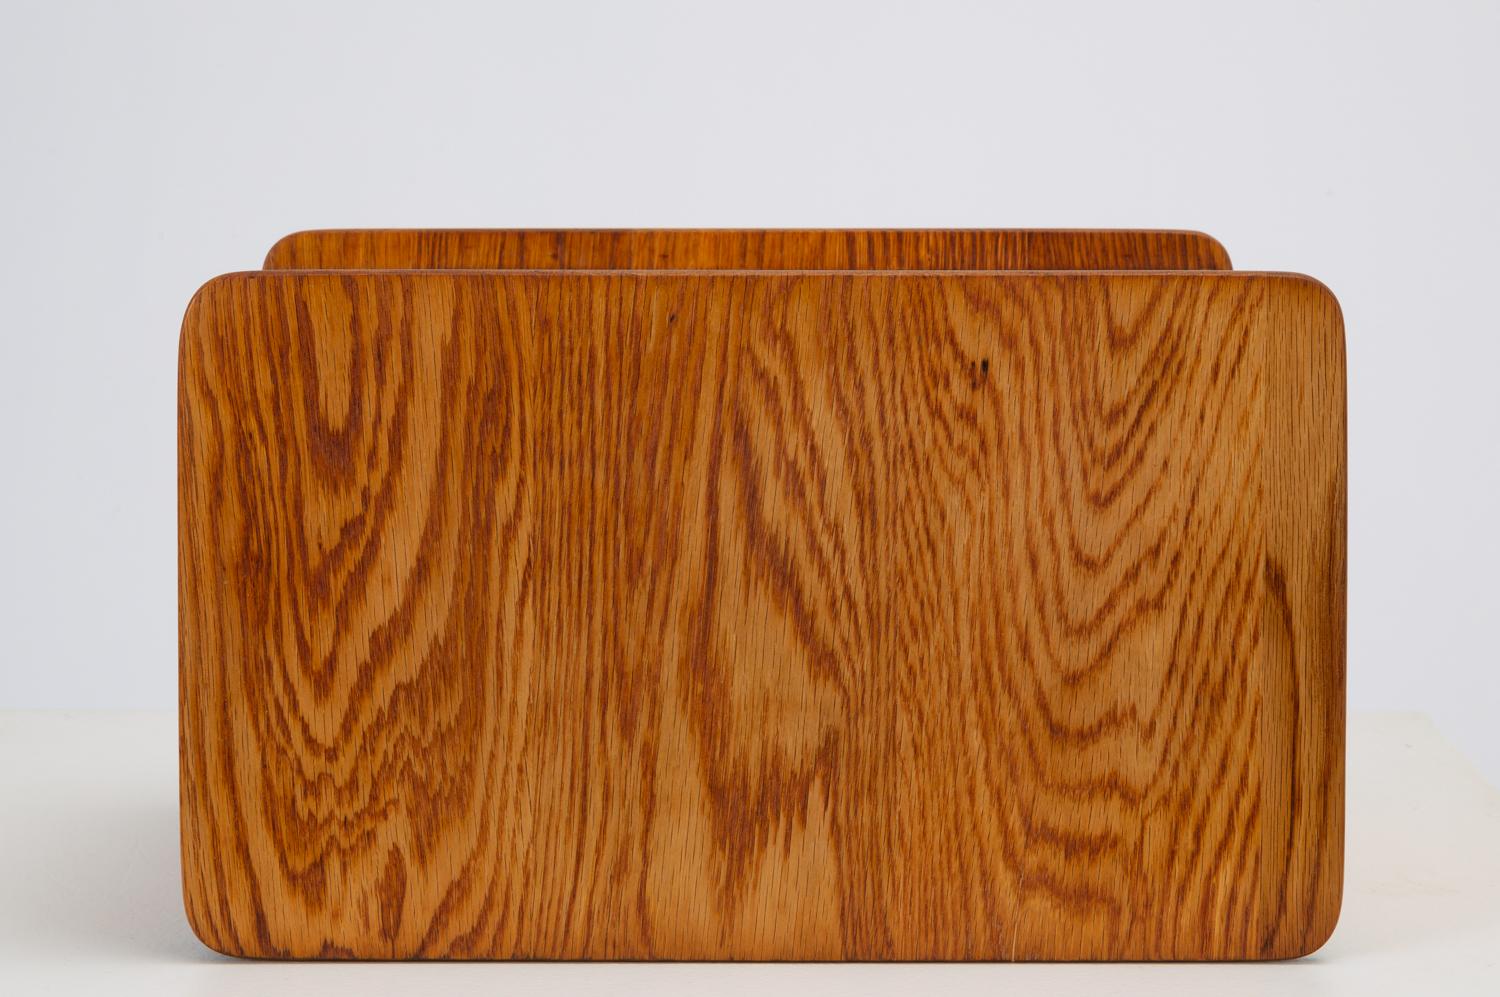 Oak Desk Organizer with Painted Drawers by Børge Mogensen for Karl Andersson 1